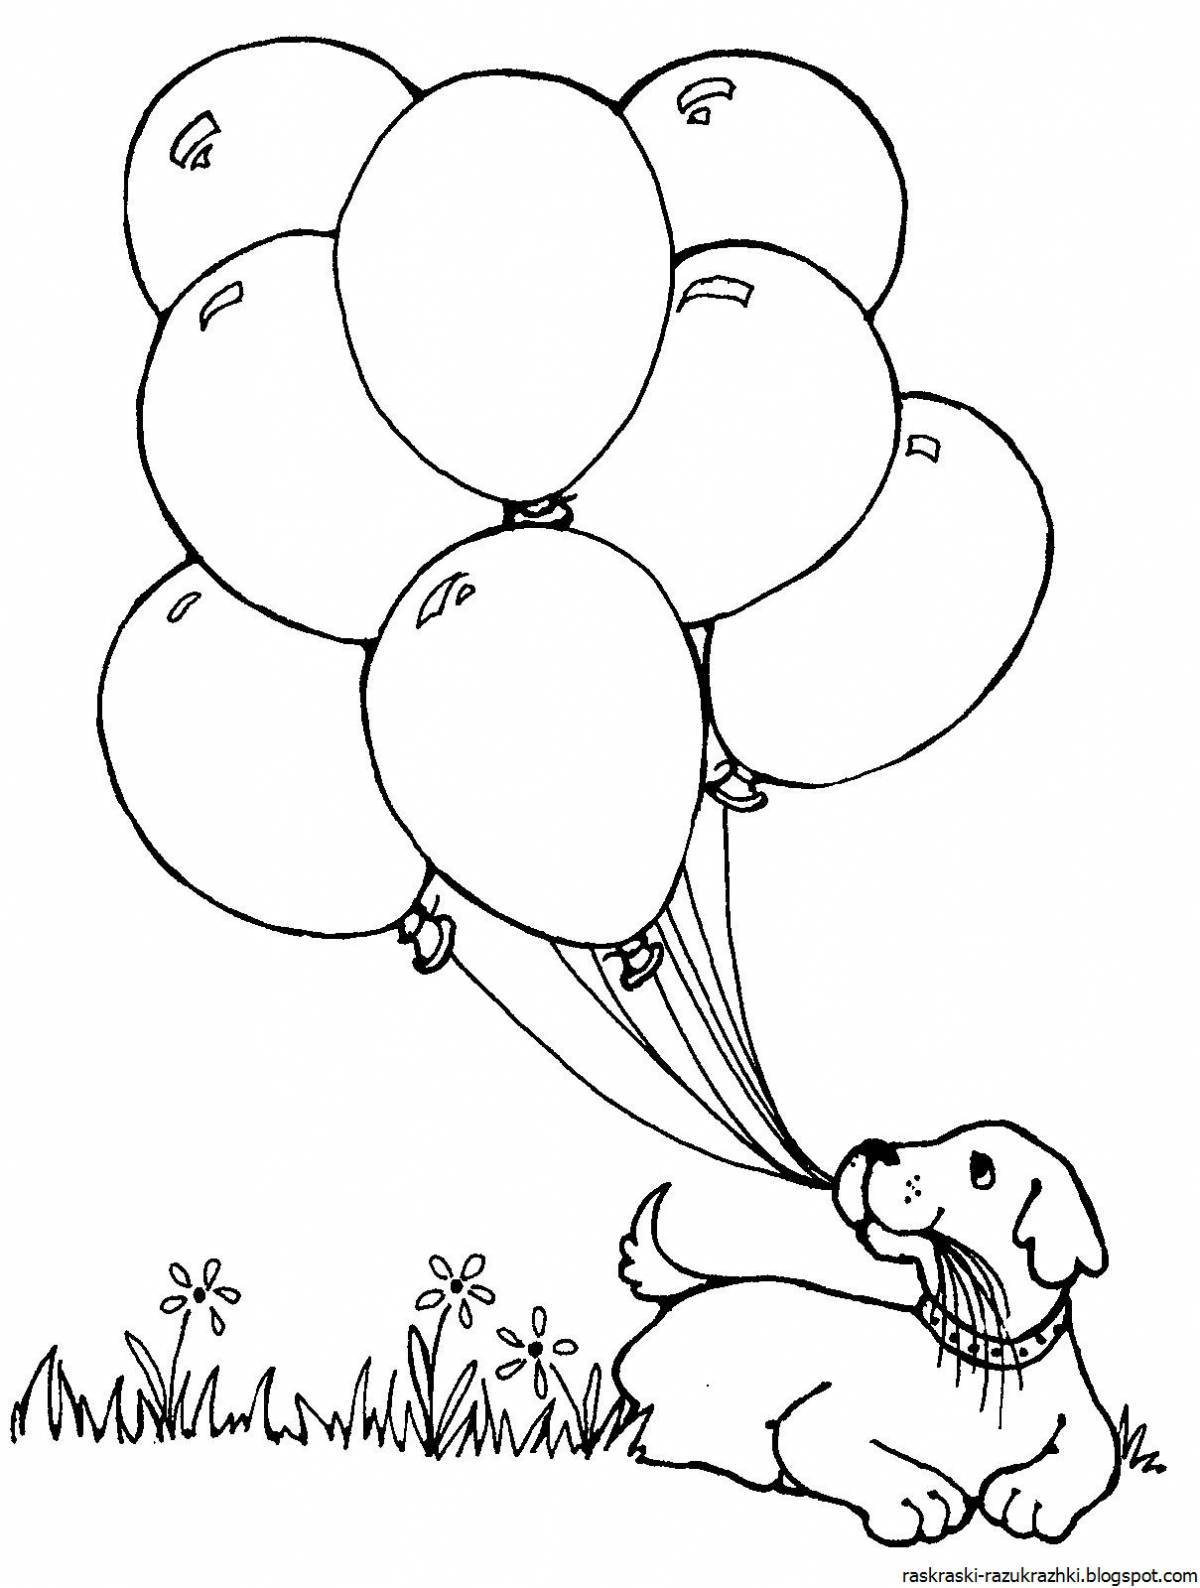 Sparkly balloons coloring book for kids